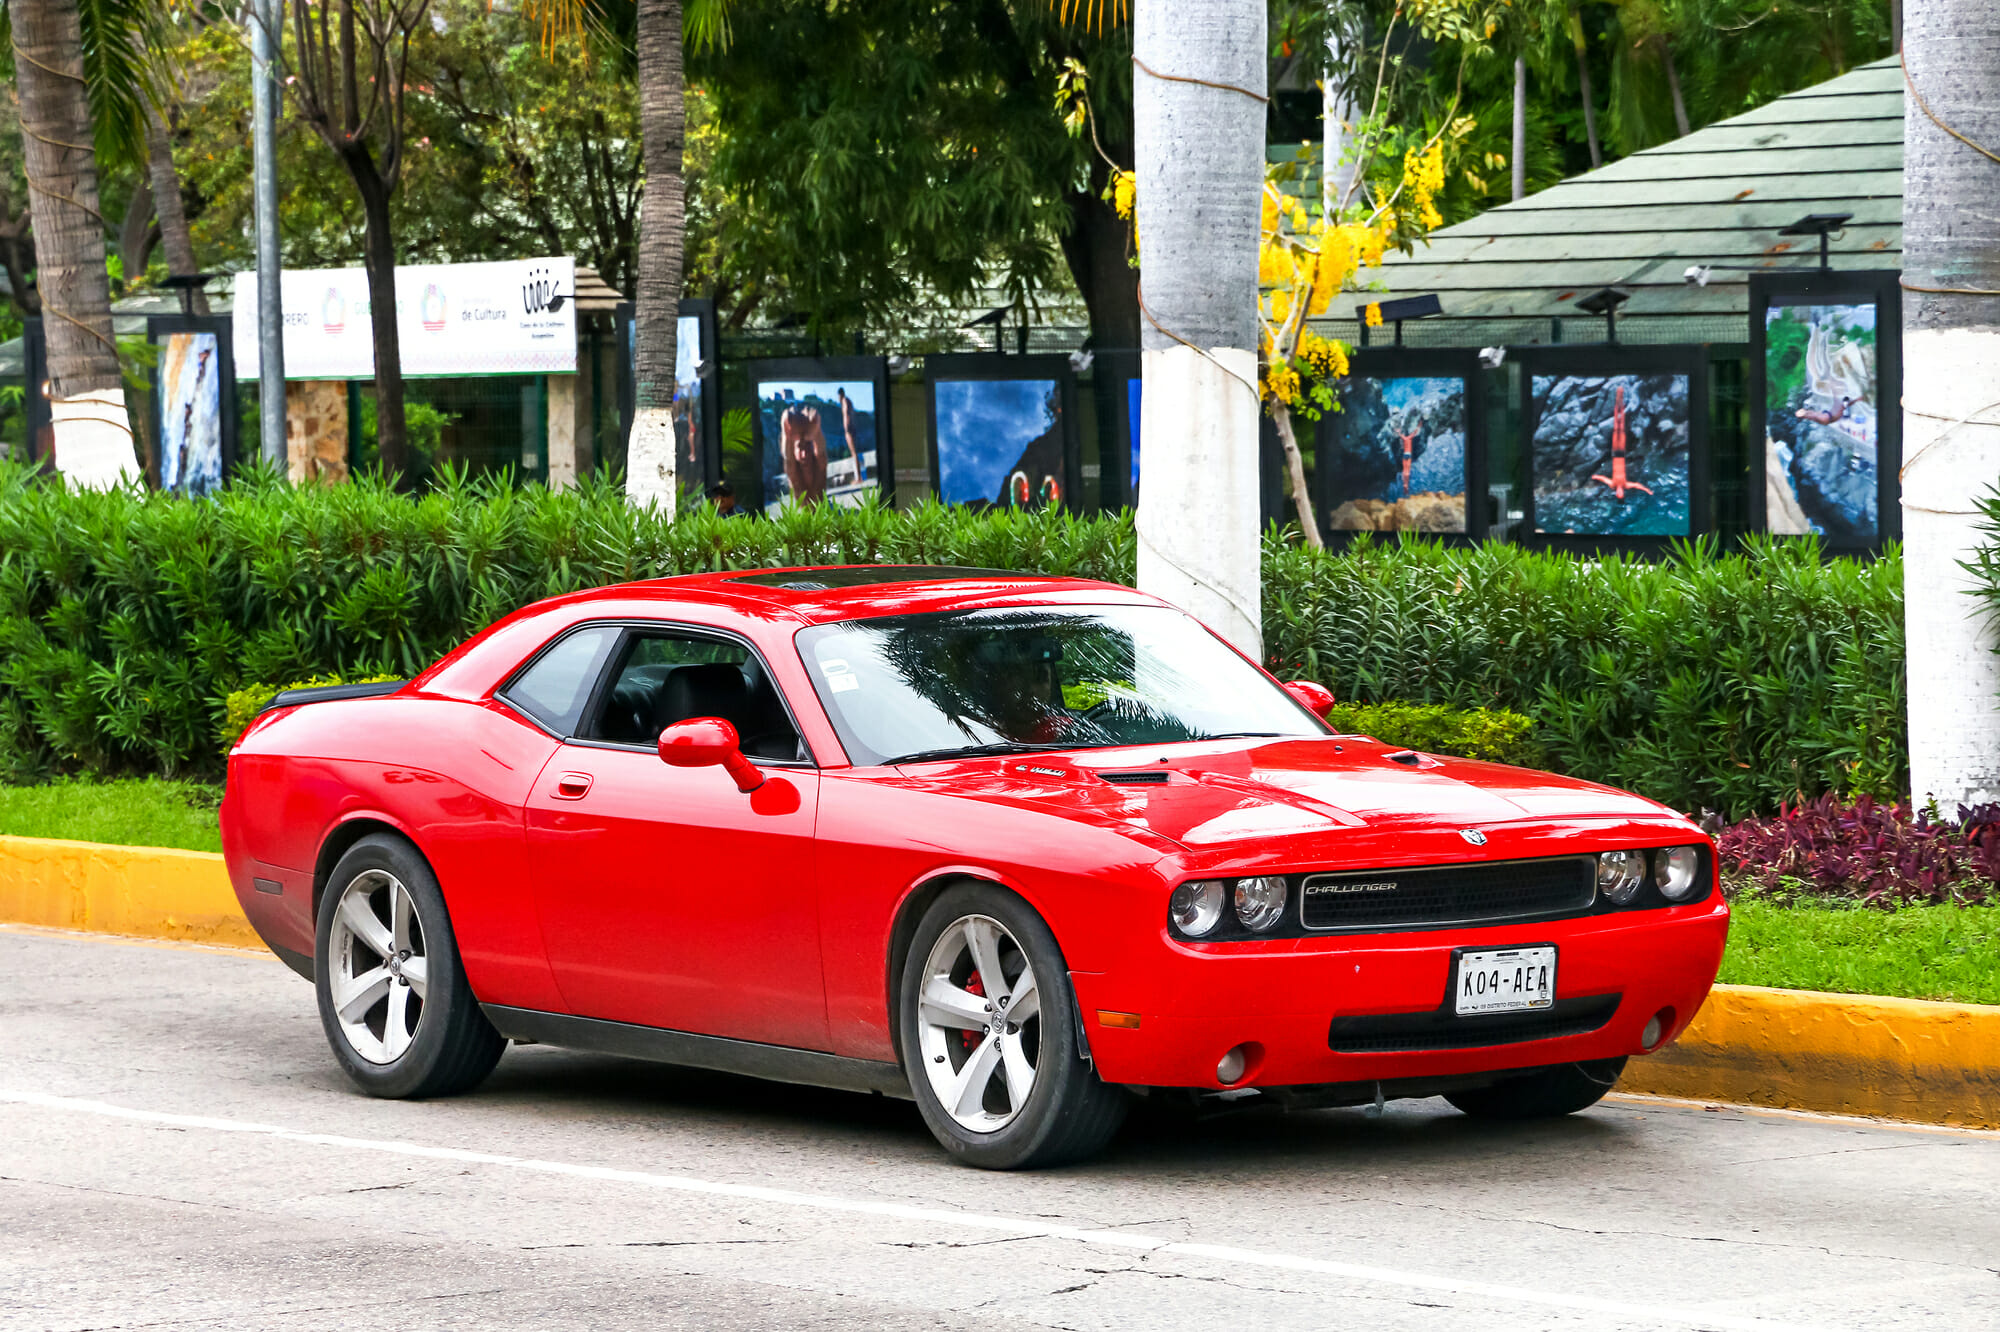 Dodge Challenger Models: How to Make the Right Choice